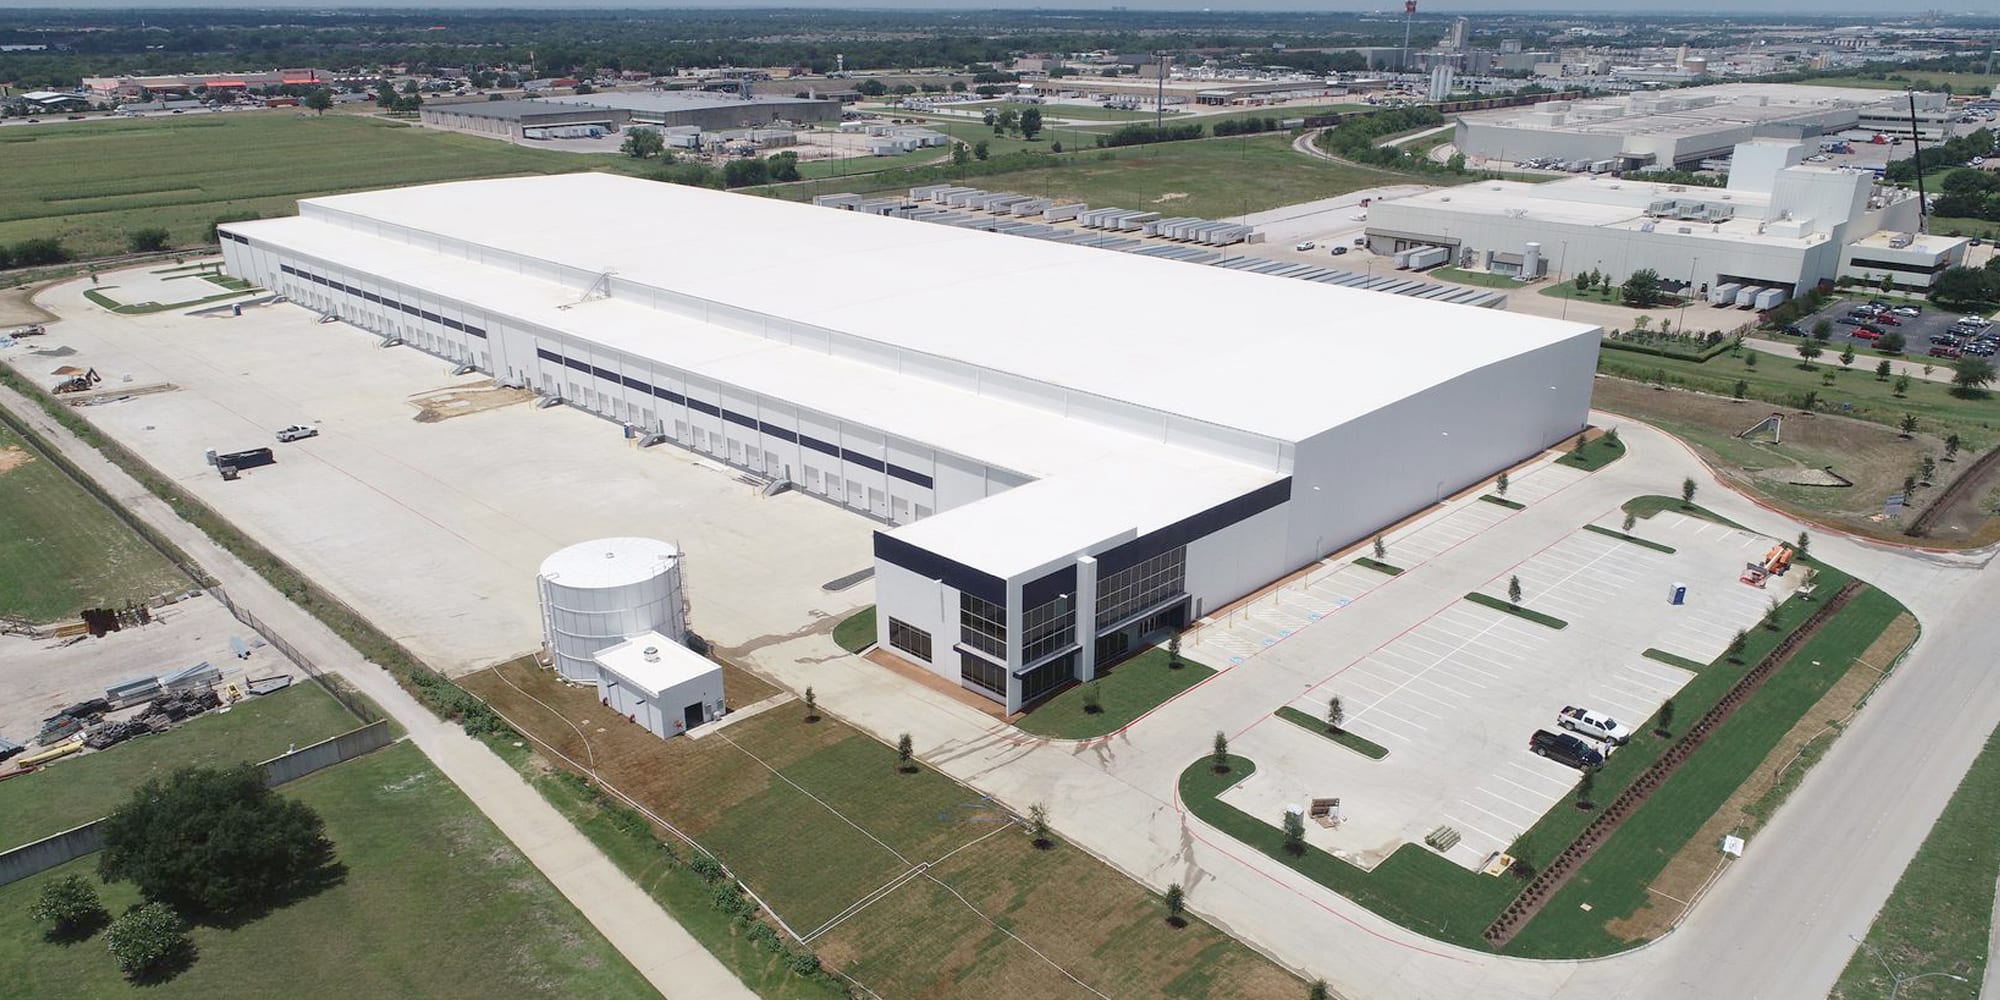 DFW ColdSpot at Carter Industrial Park, freezer/cold storage warehouse in Dallas-Fort Worth area | 300,000 SF